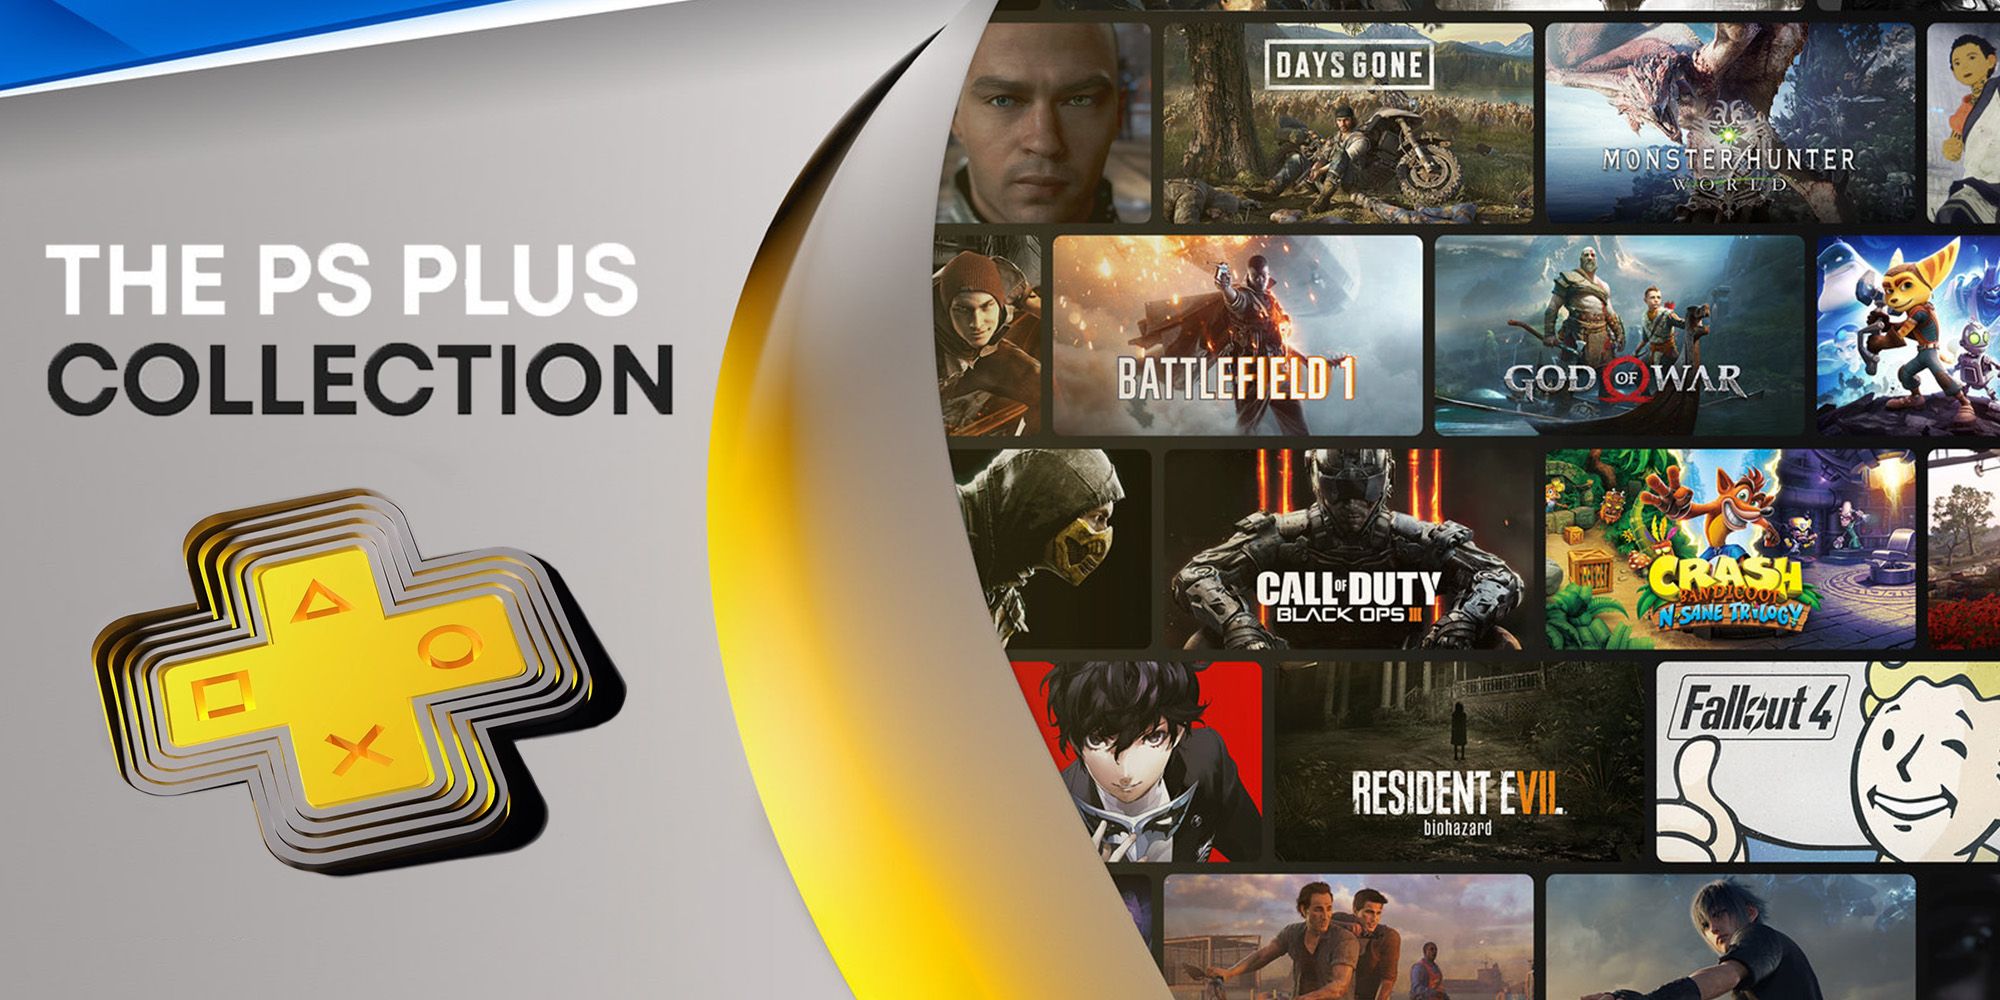 PS Plus Collection Promotional Image featuring it's logo and games such as God of War, Days Gone, and Resident Evil & Biohazard